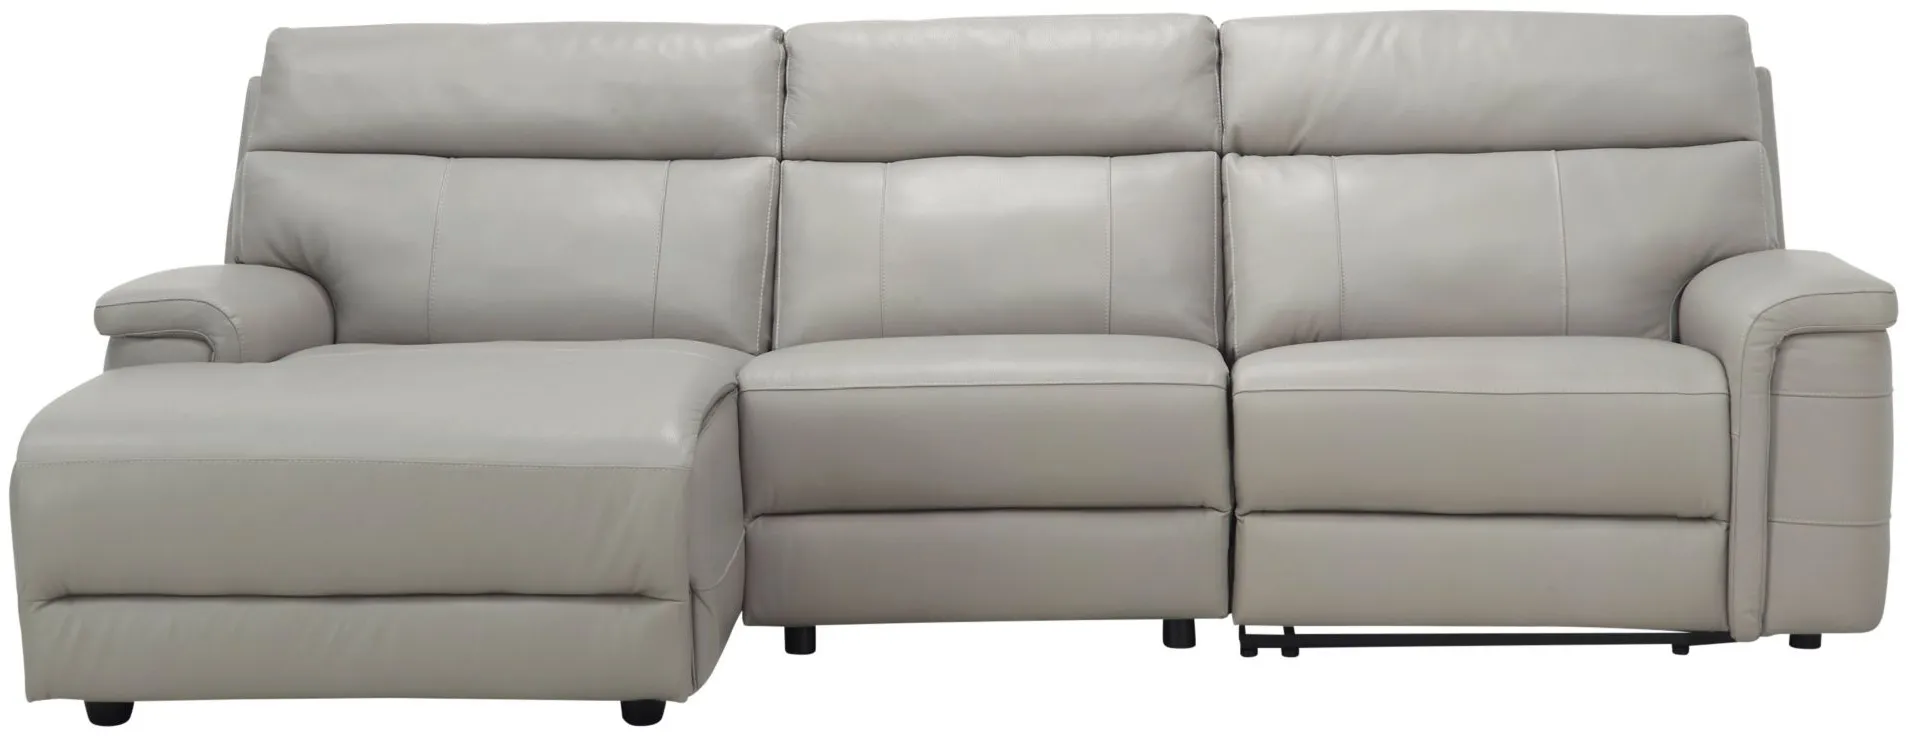 Conrad 3-pc. Sectional Sofa in Gray by Chateau D'Ax